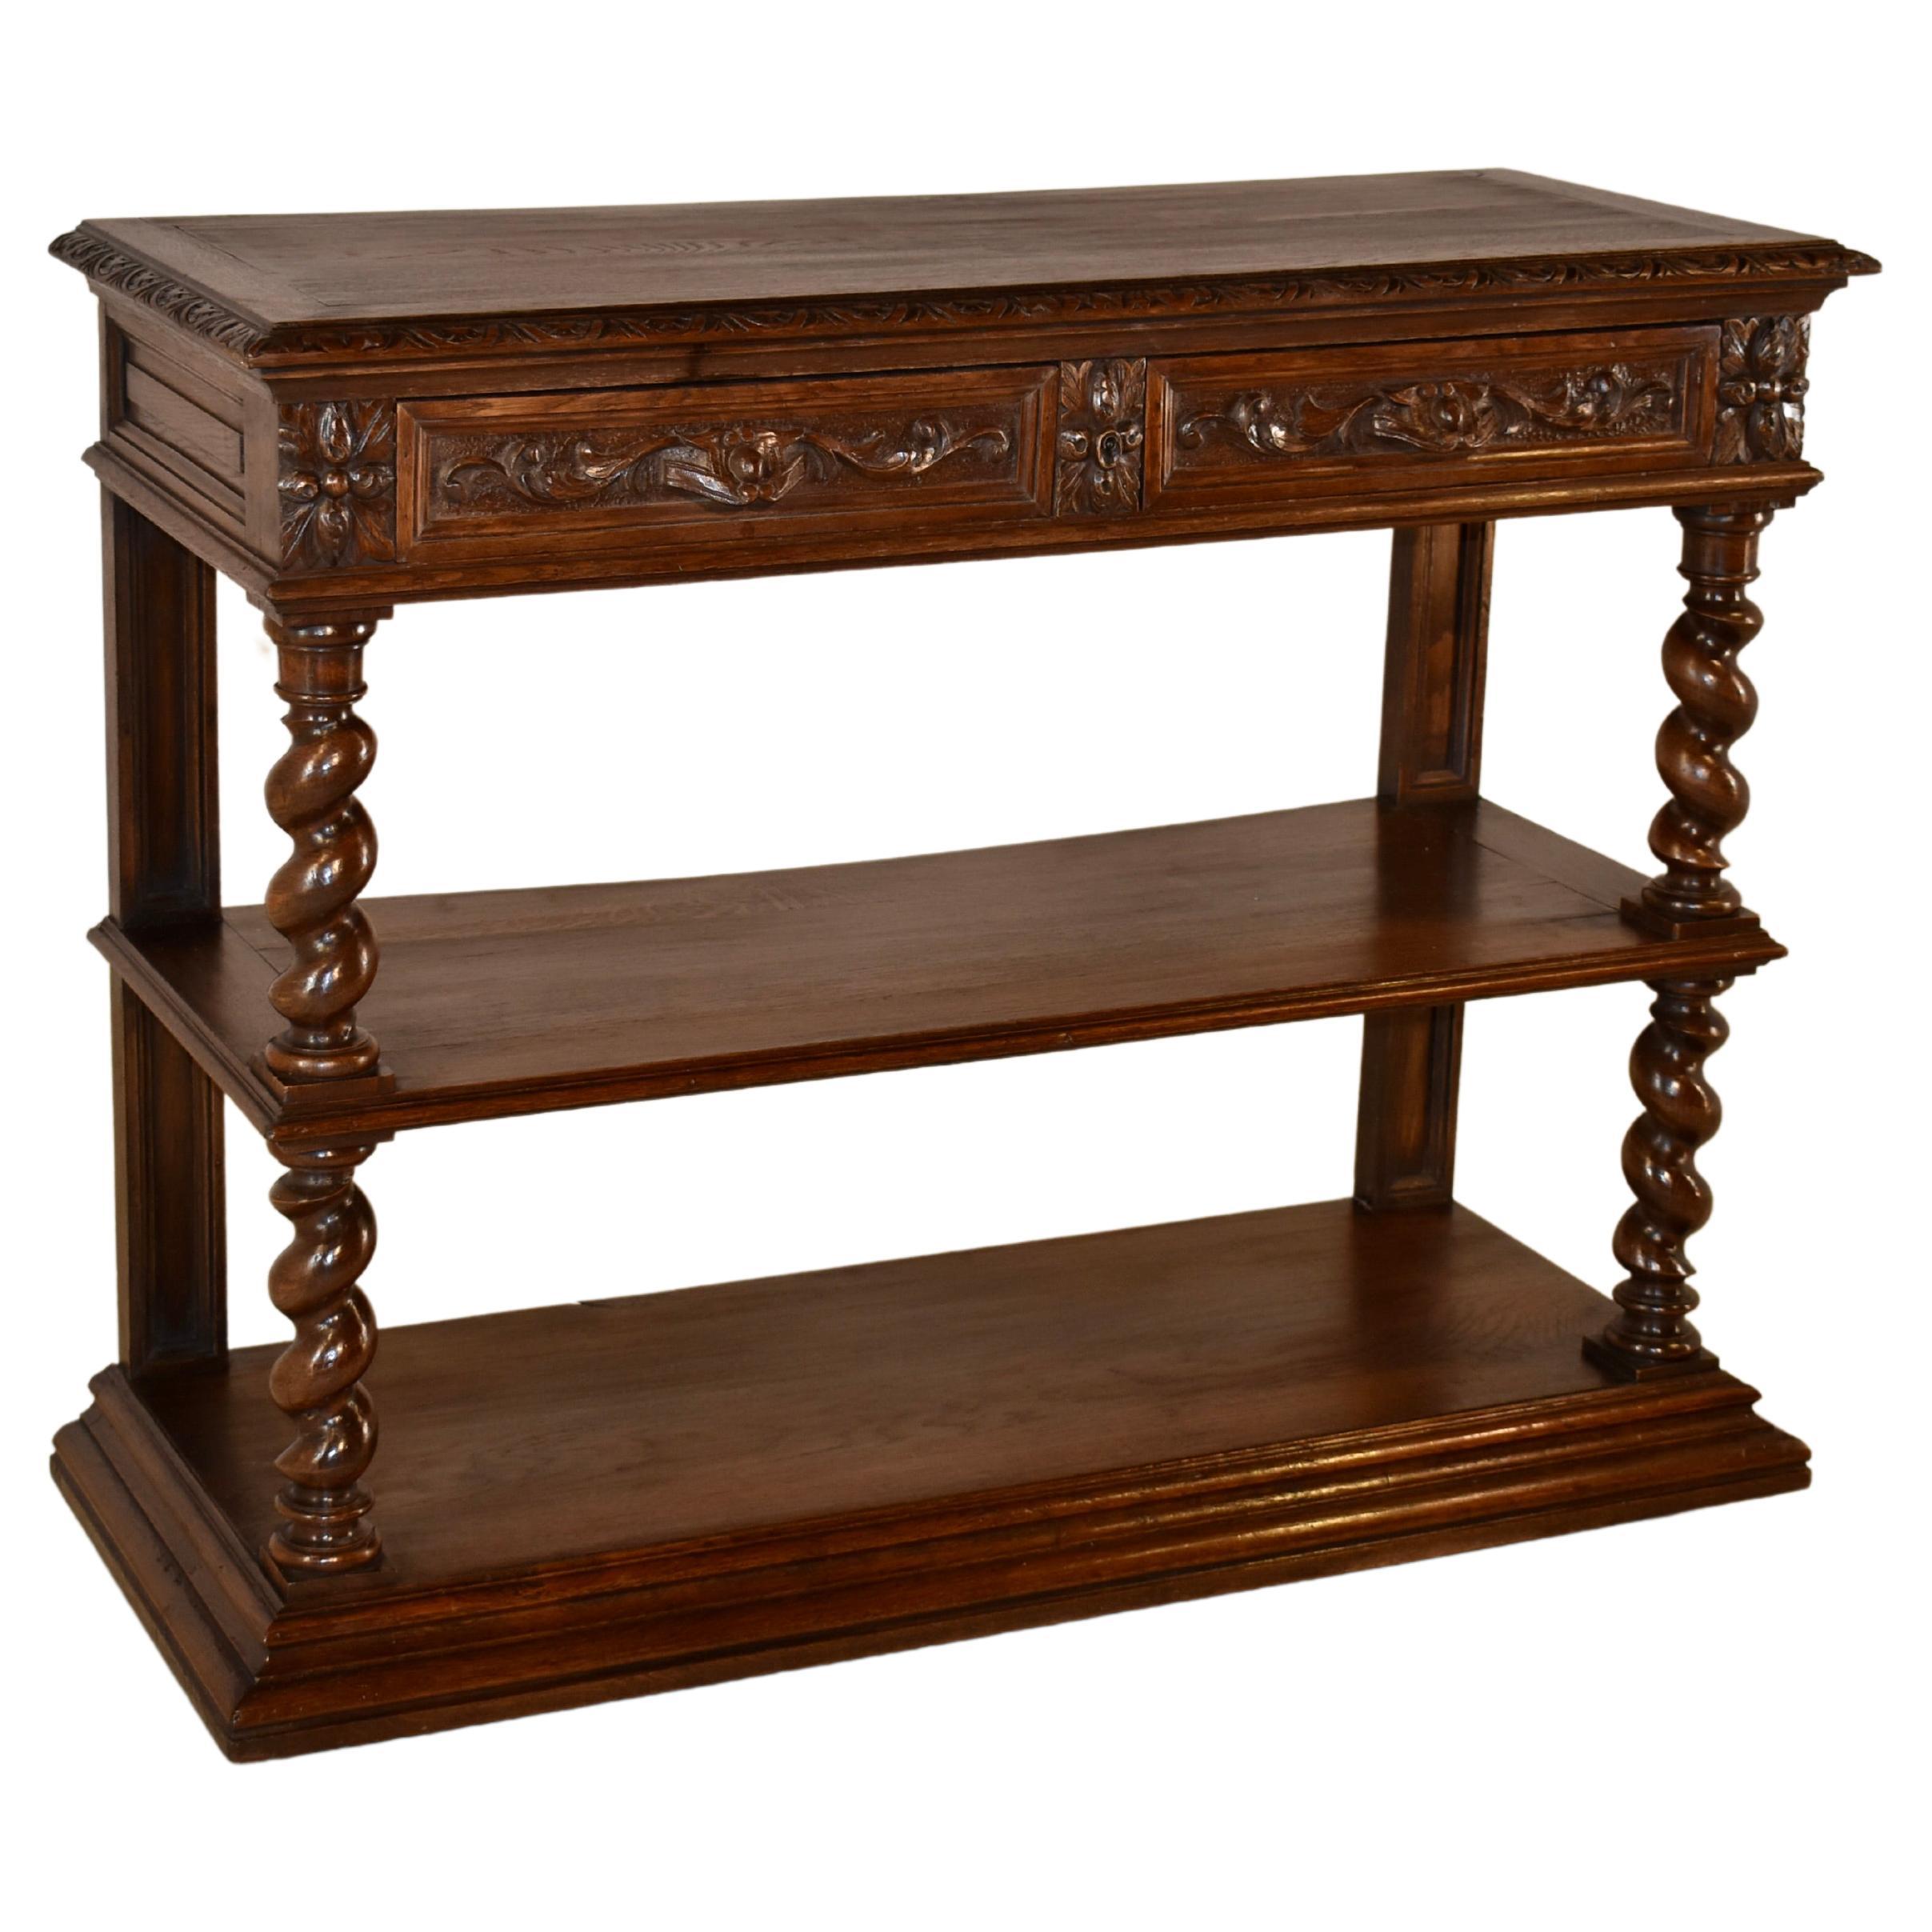 19th century oak dessert buffet from France. The top is banded and has a beveled and carved decorated edge around the top in a nulled pattern. The top lifts to reveal a marble surface for serving which remains open with a scalloped bracket. The top